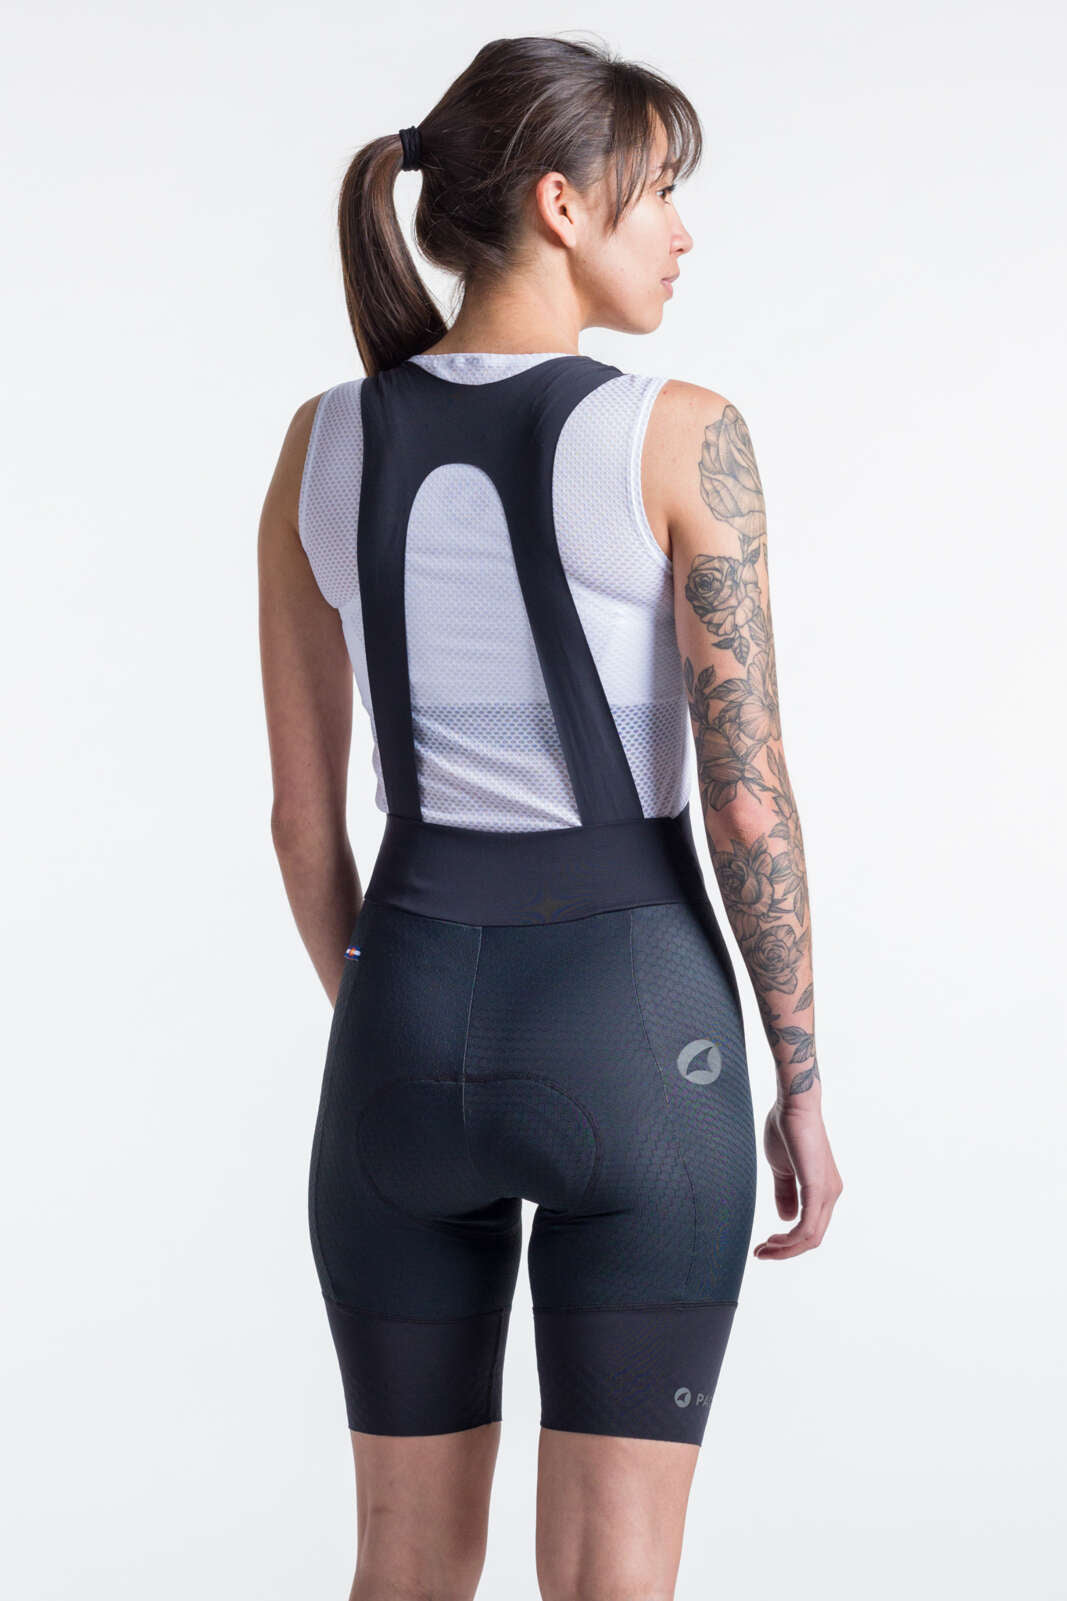 Women's Compression Cycling Bibs - Back View